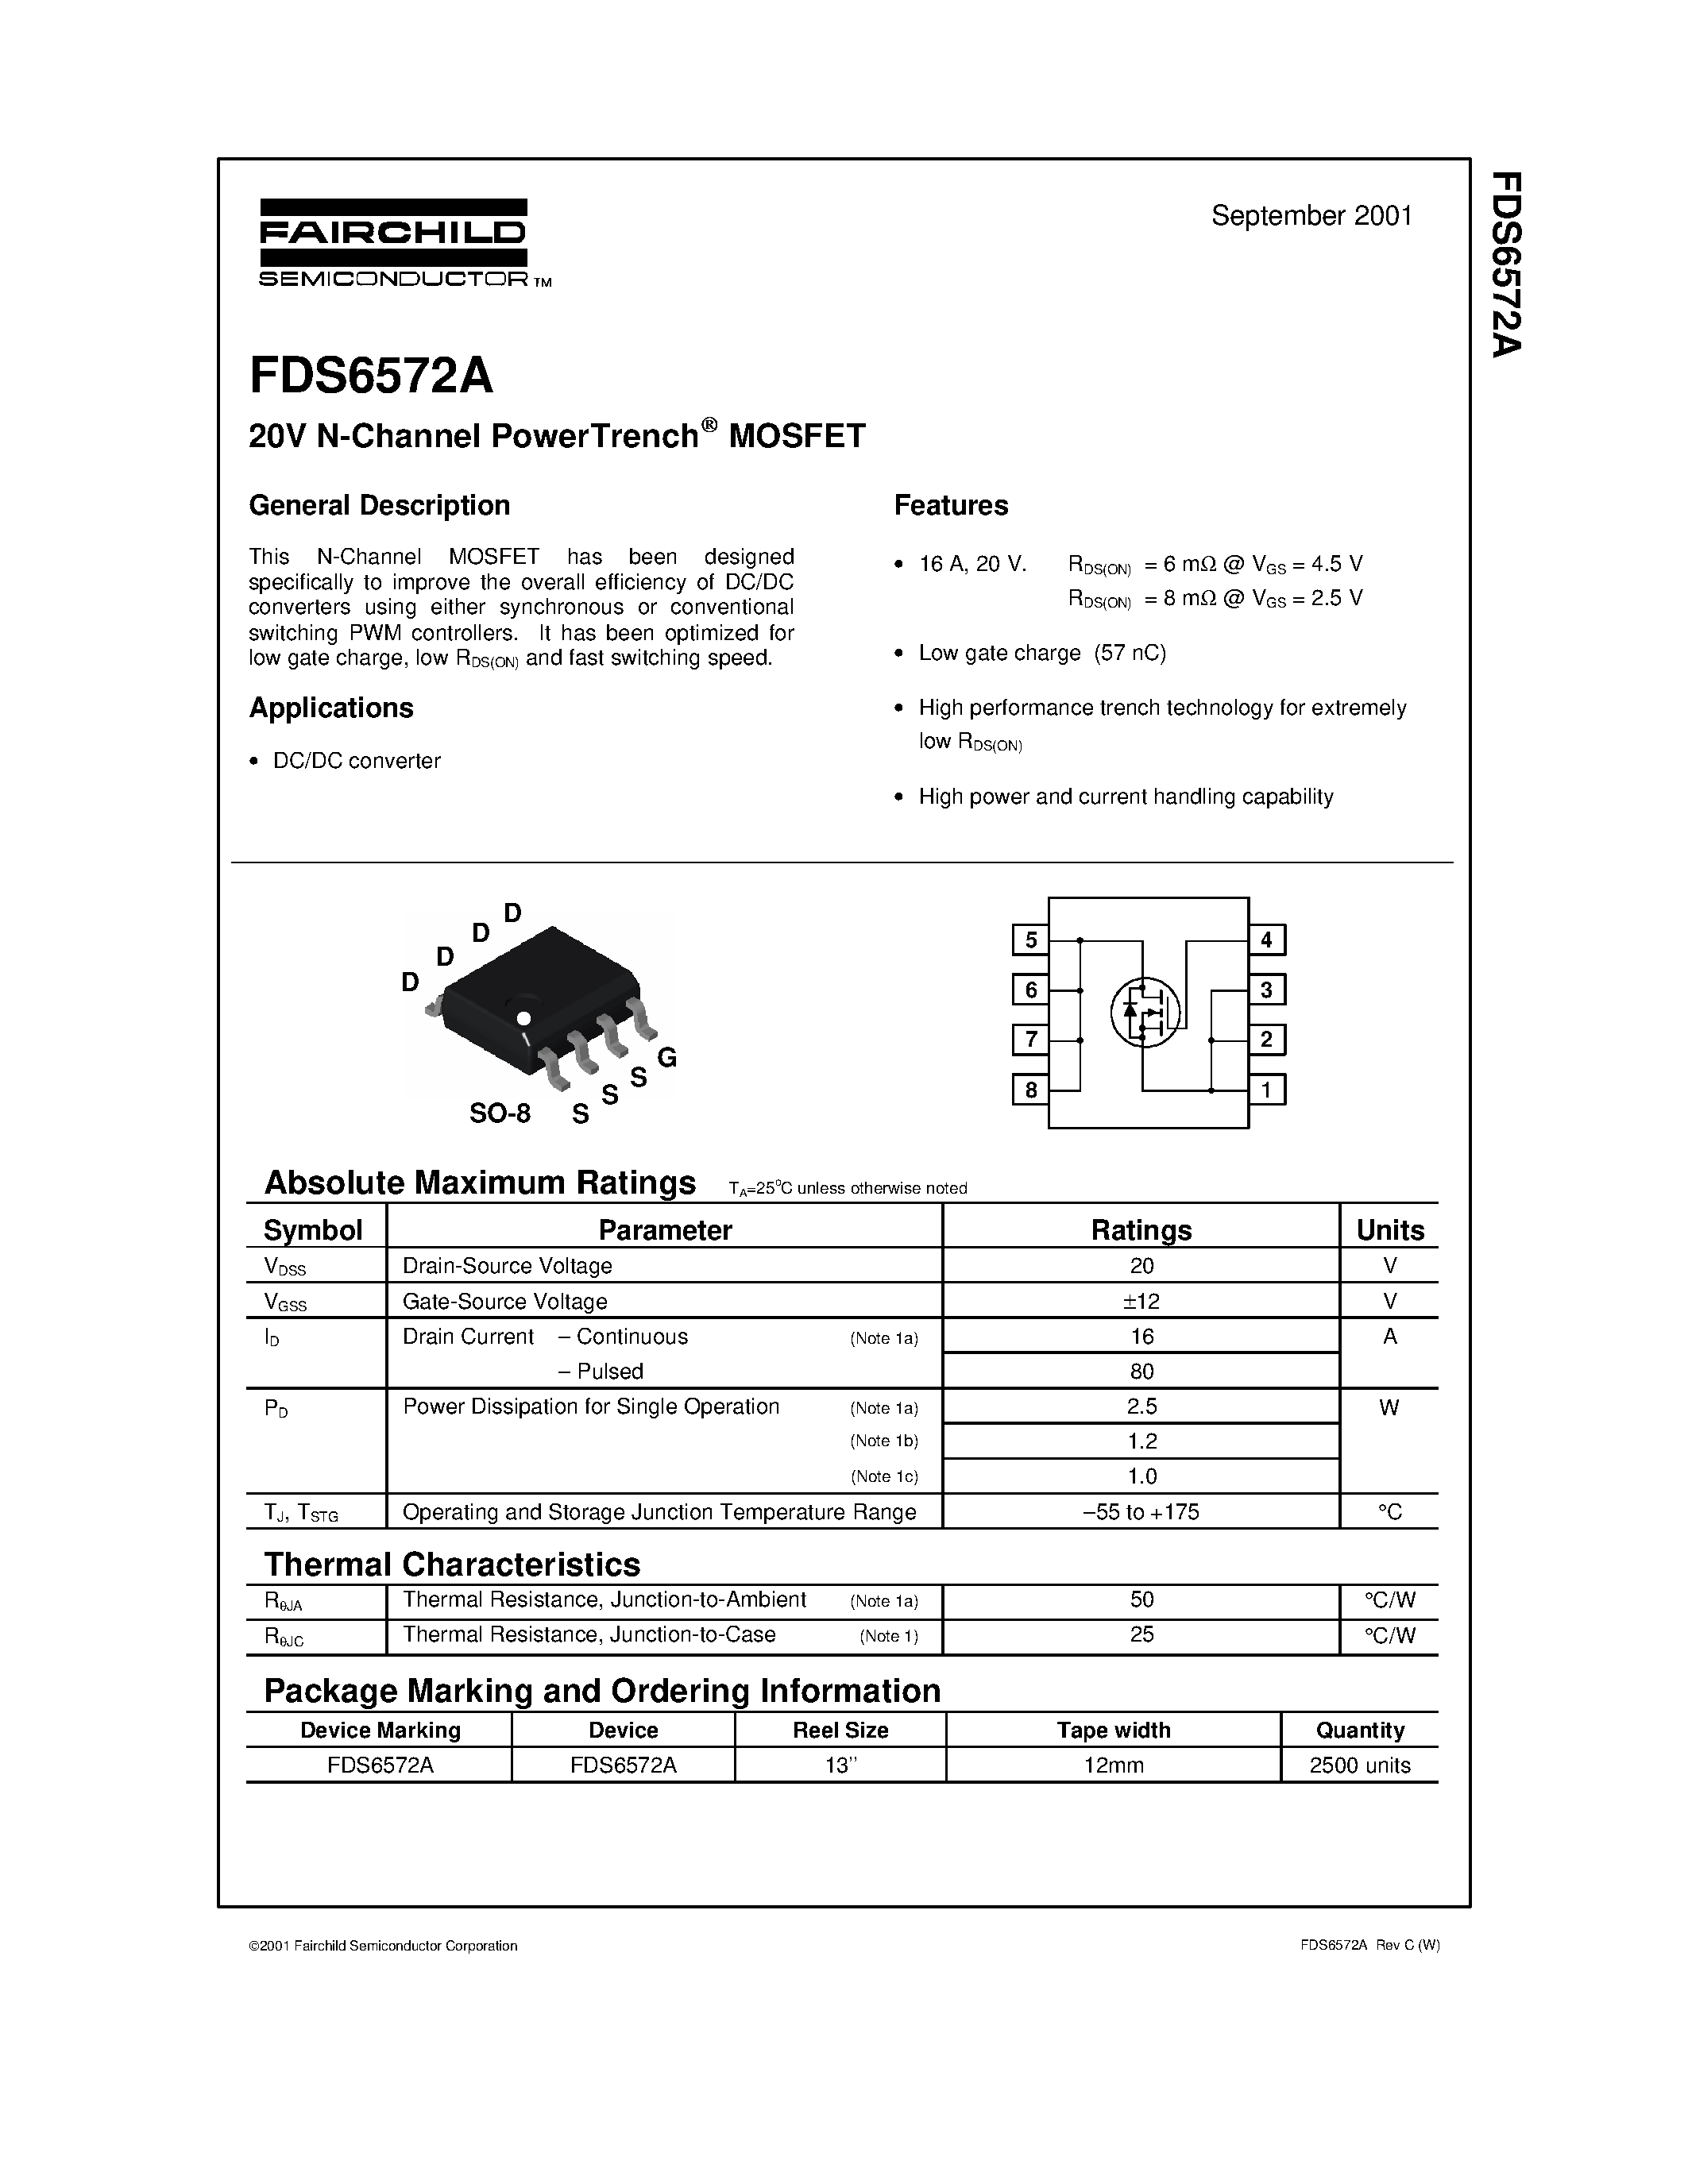 Даташит FDS6572A - 20V N-Channel PowerTrench MOSFET страница 1